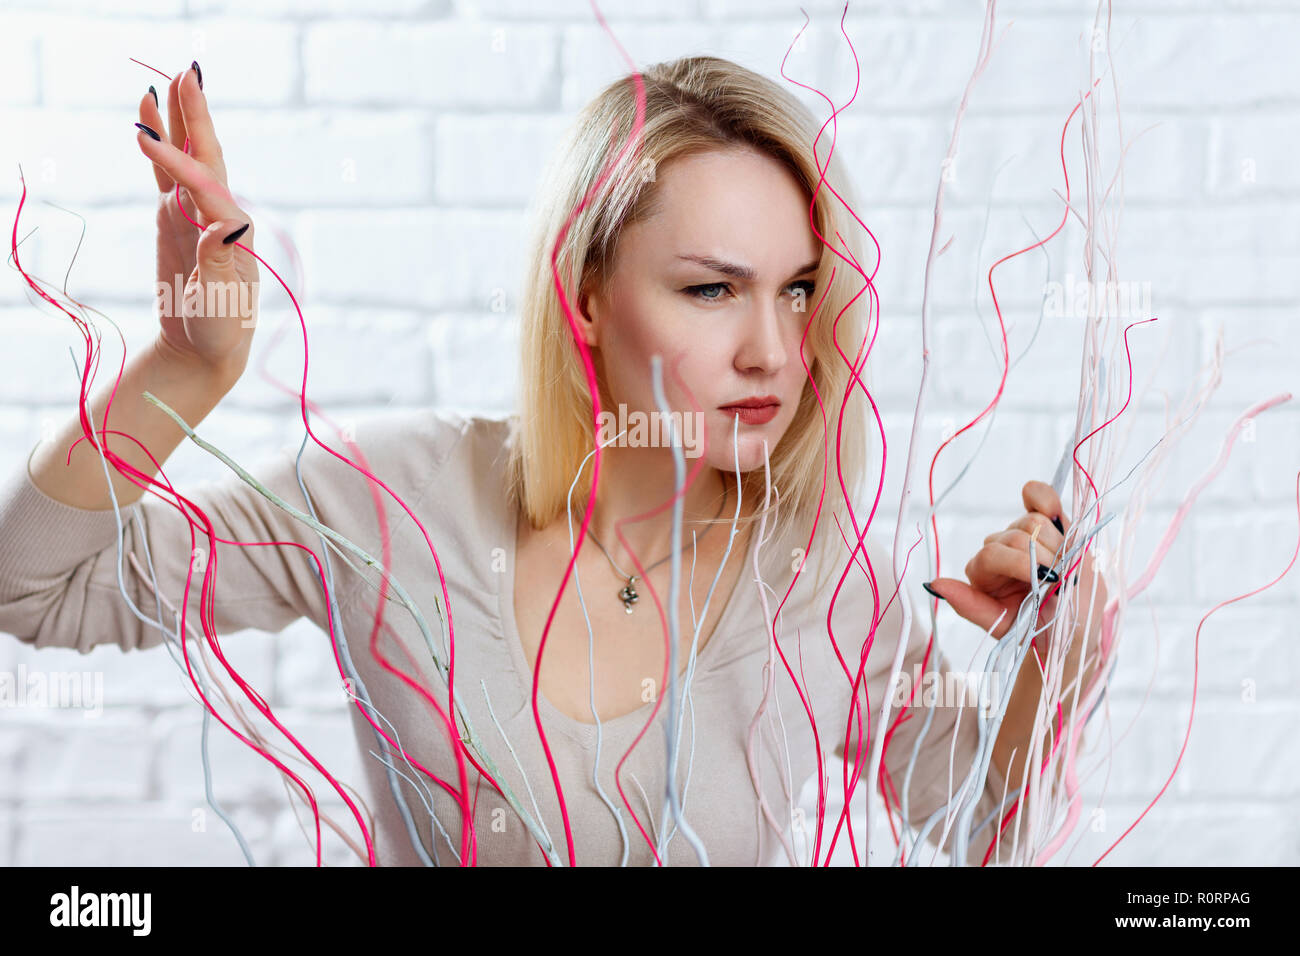 Woman with suspicious sight looking out over decoration in studio. Stock Photo